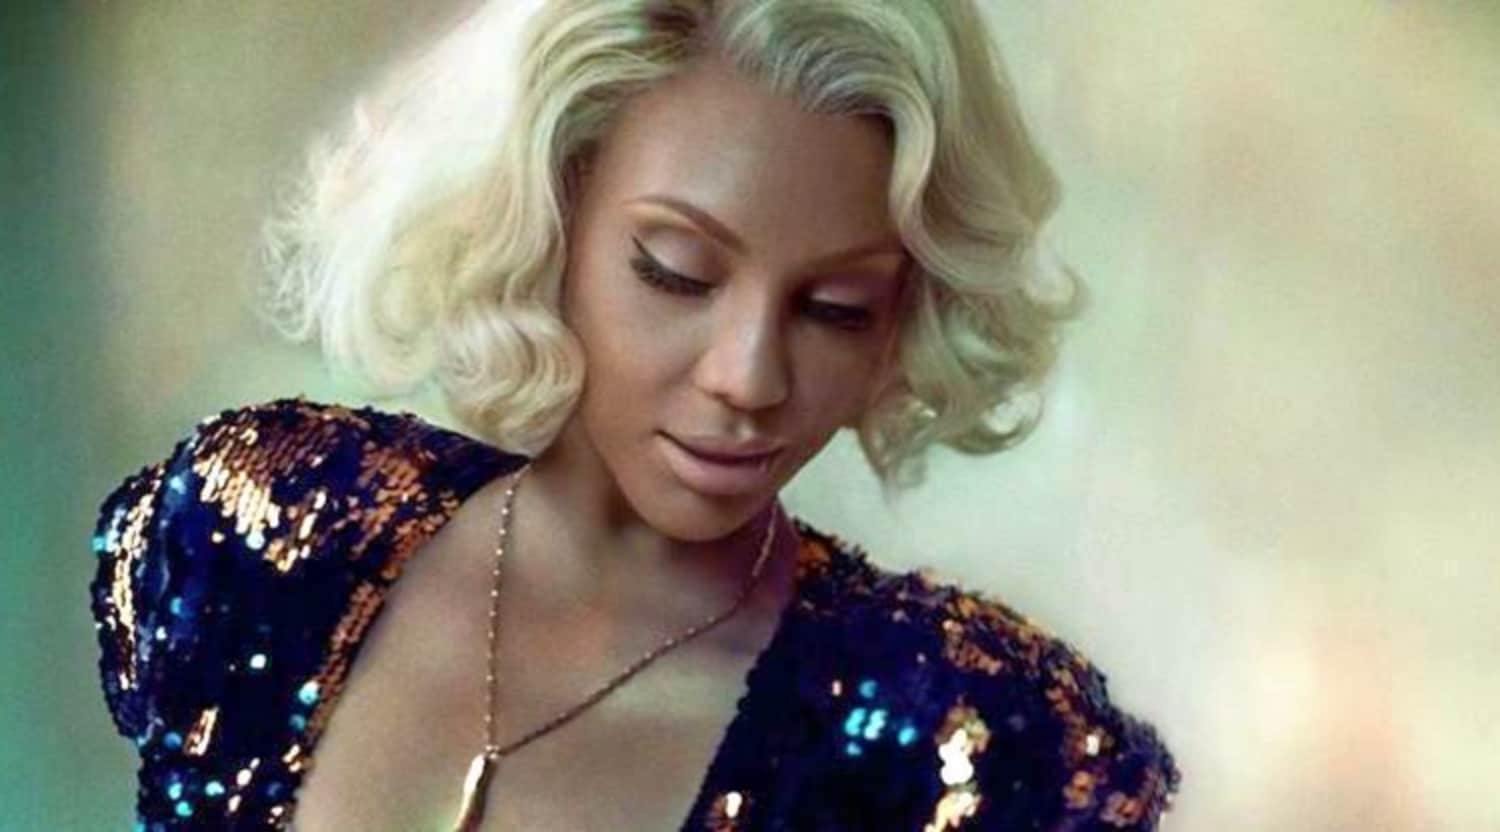 Tamar Braxton Has A Great Solution To One Of Her Fans' Problems